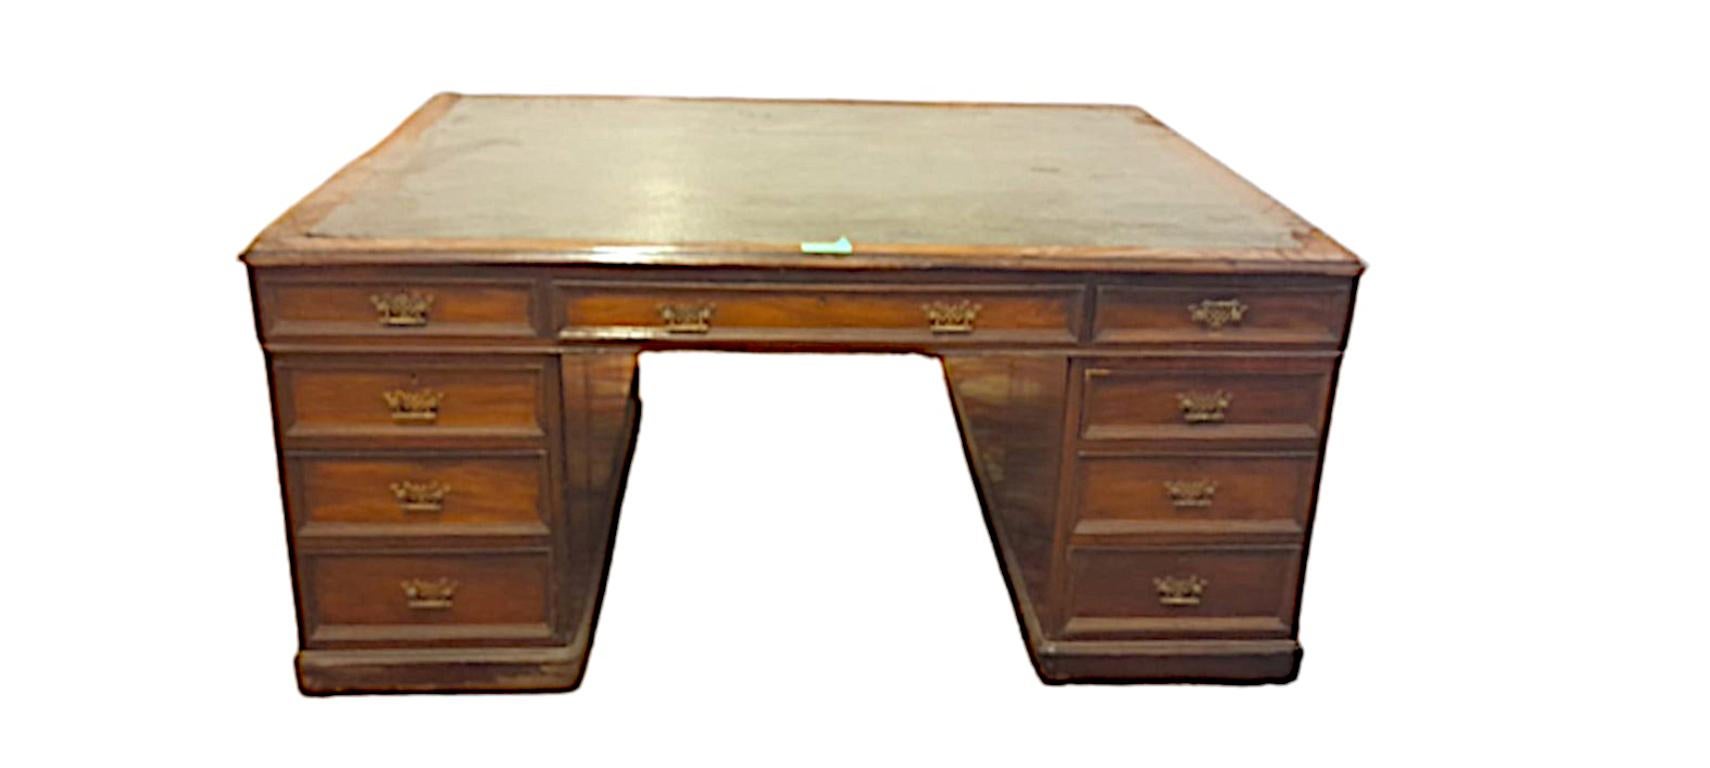 Antique Mahogany Double Sided  Desk of French origin In Good Condition For Sale In Cesena, FC